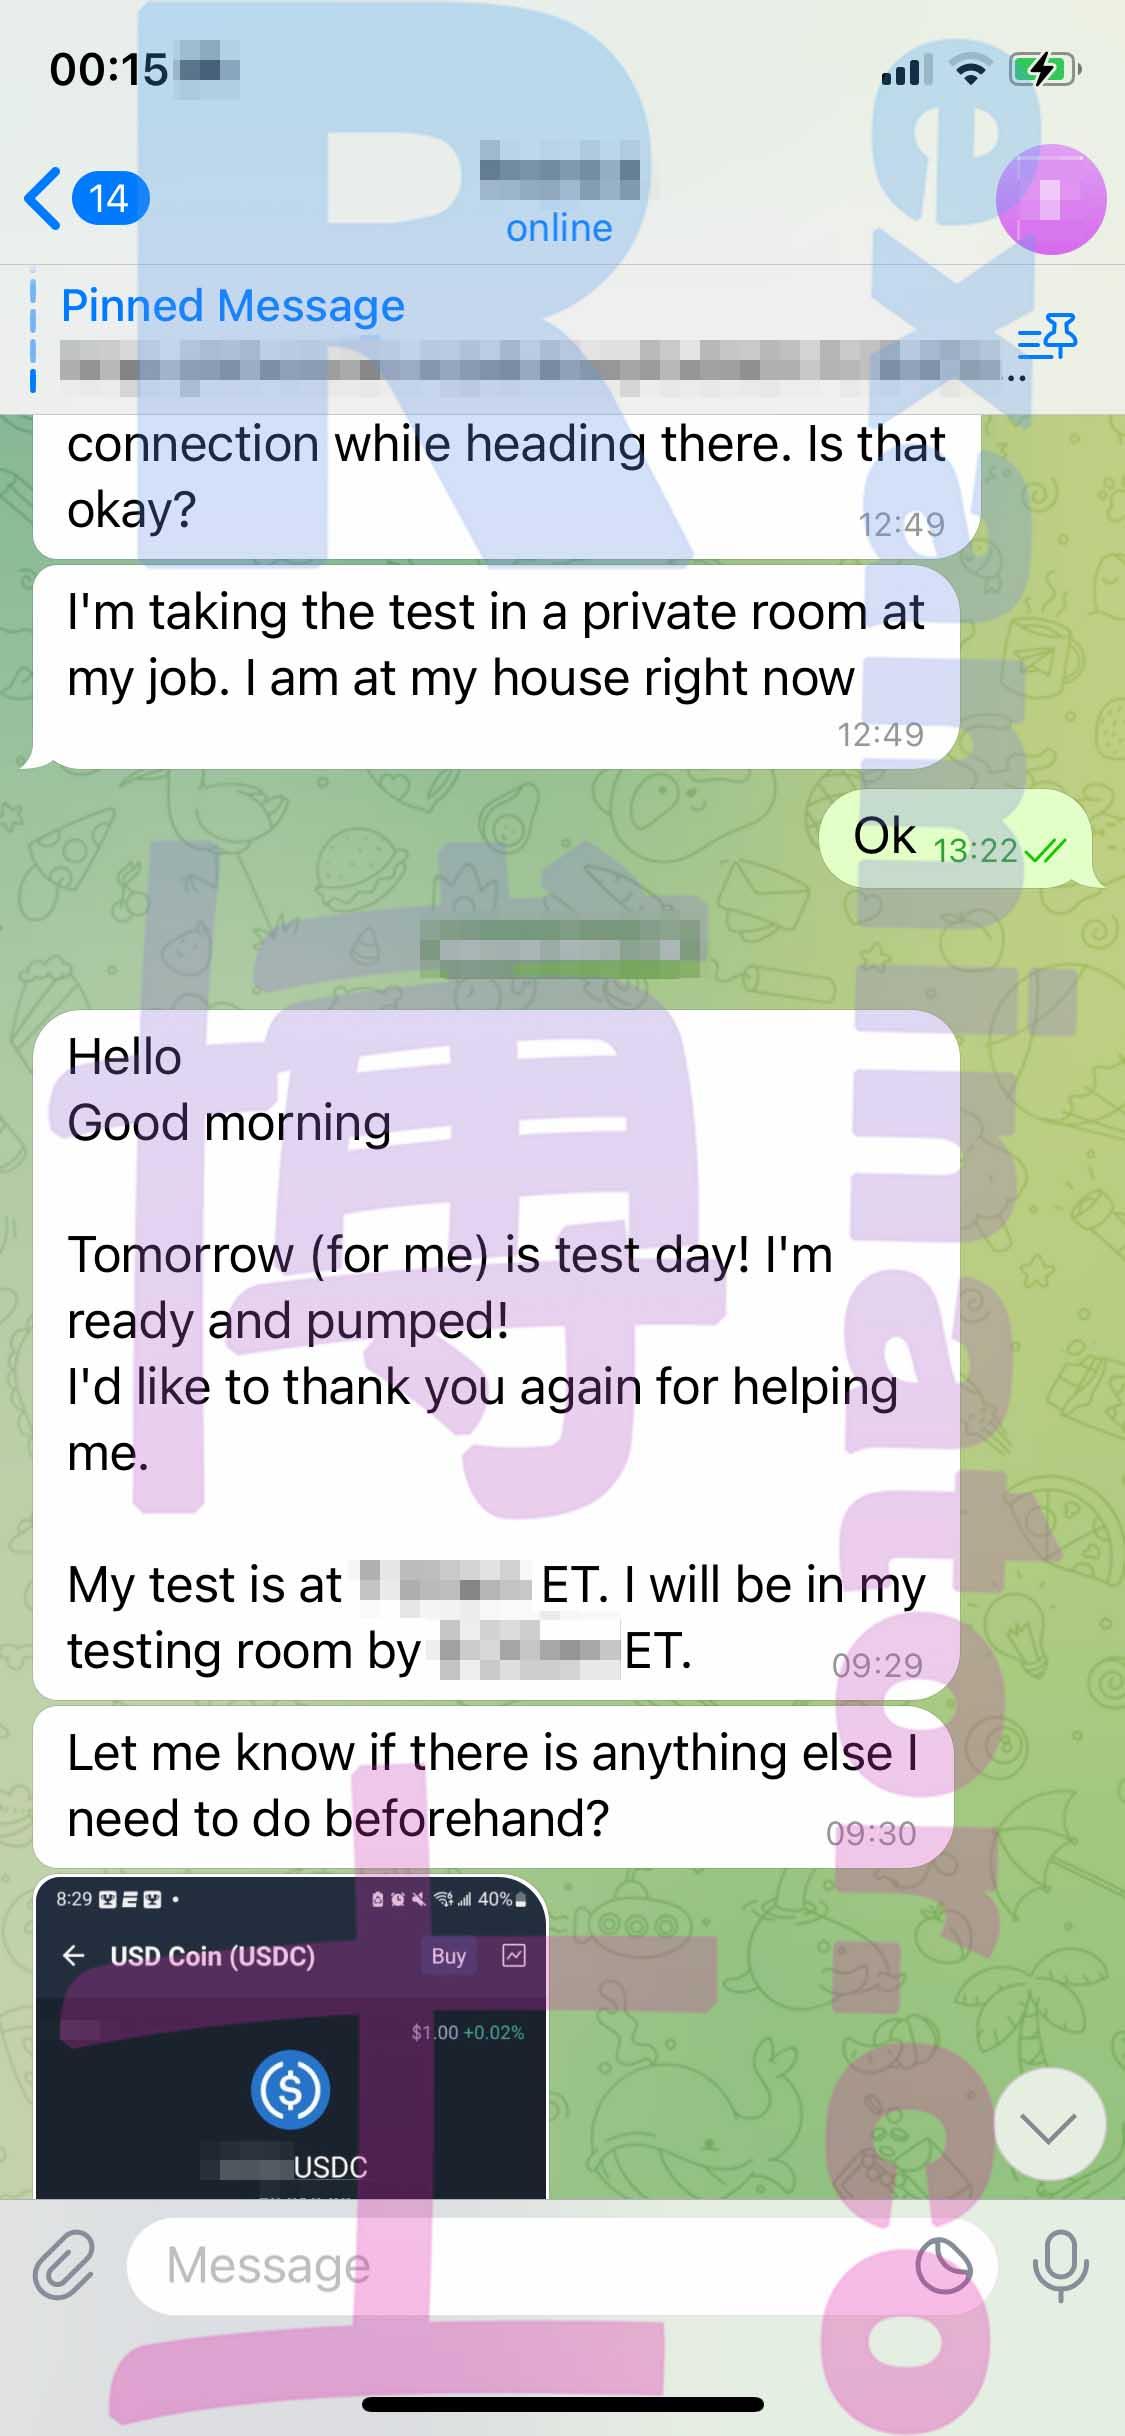 screenshot of chat logs for GRE Cheating success story #453